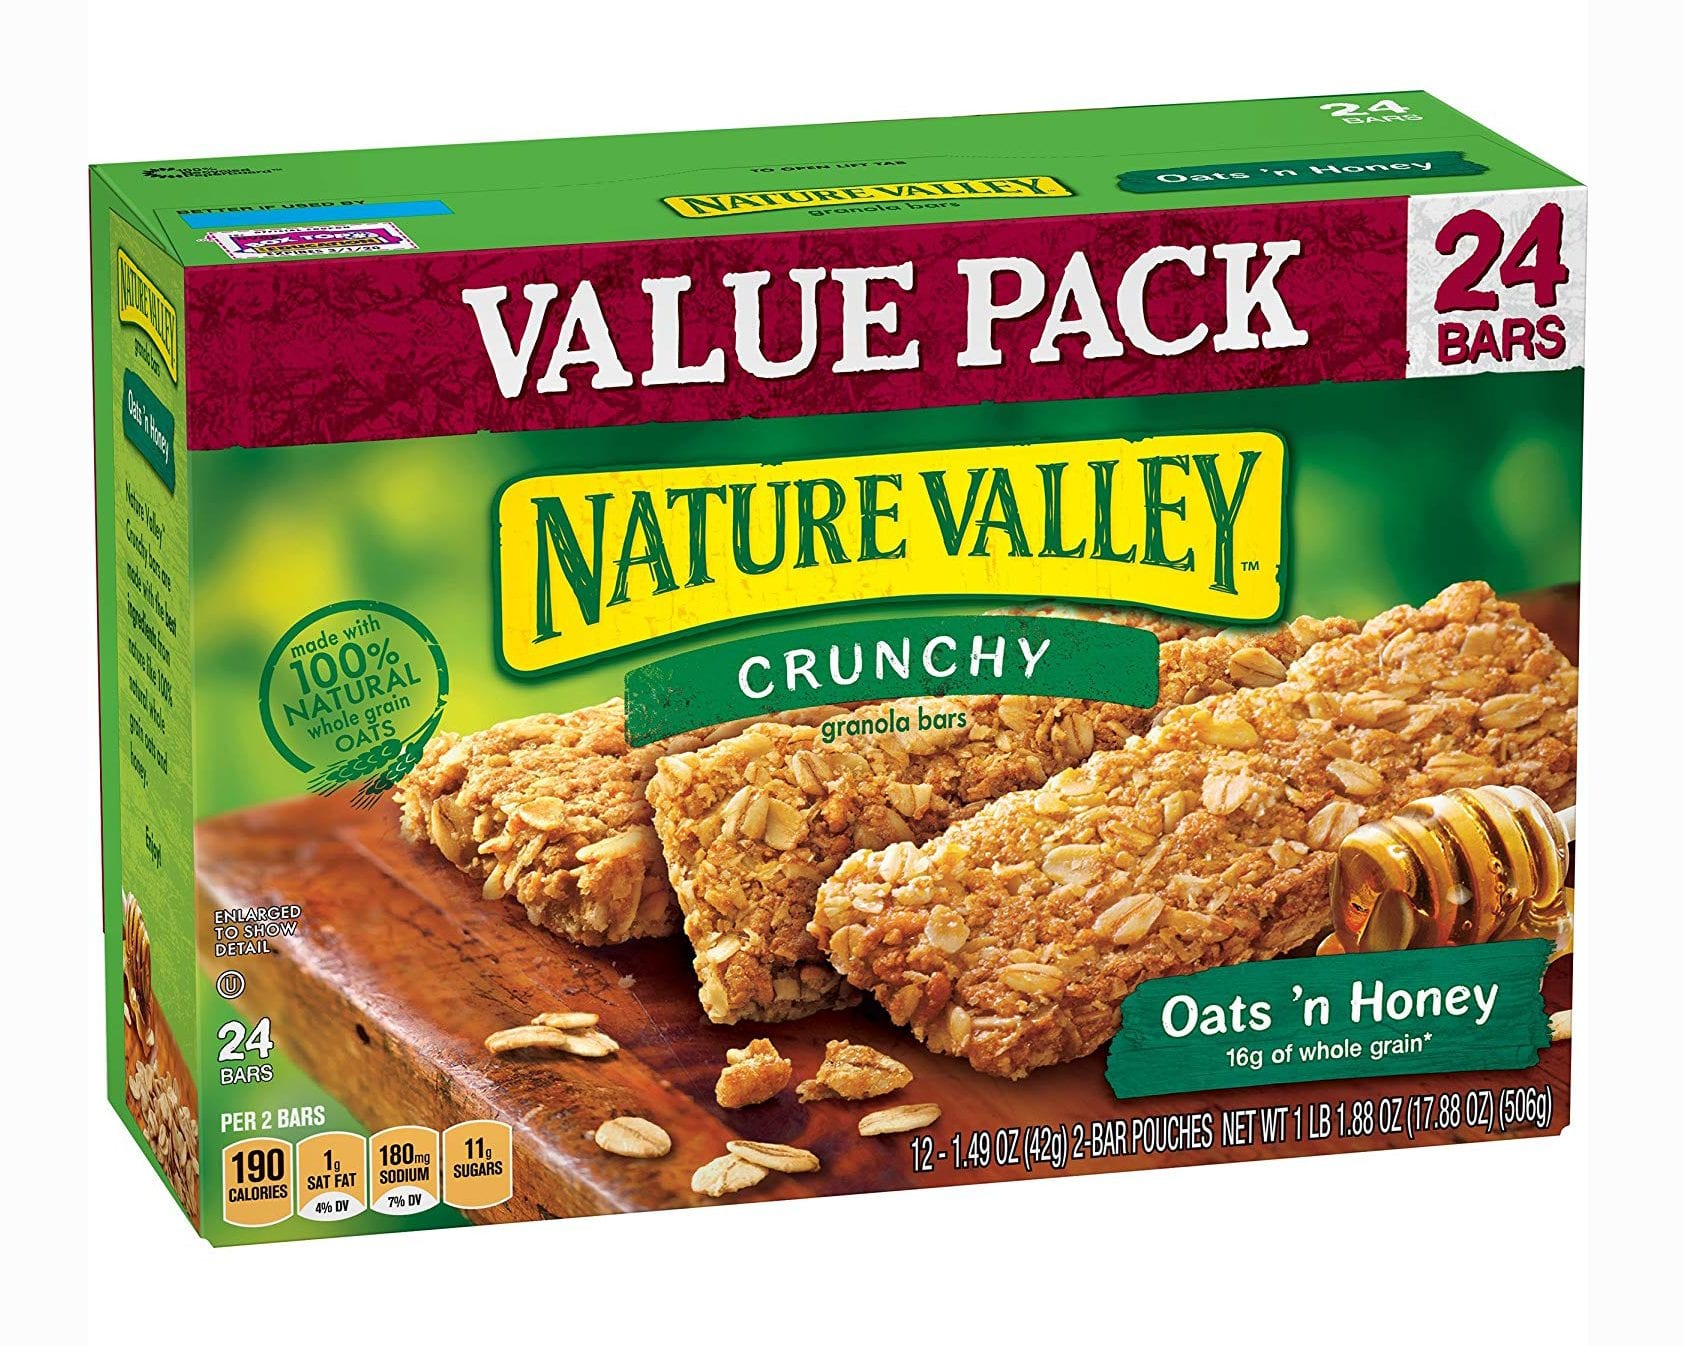 are nature valley granola bars safe for dogs